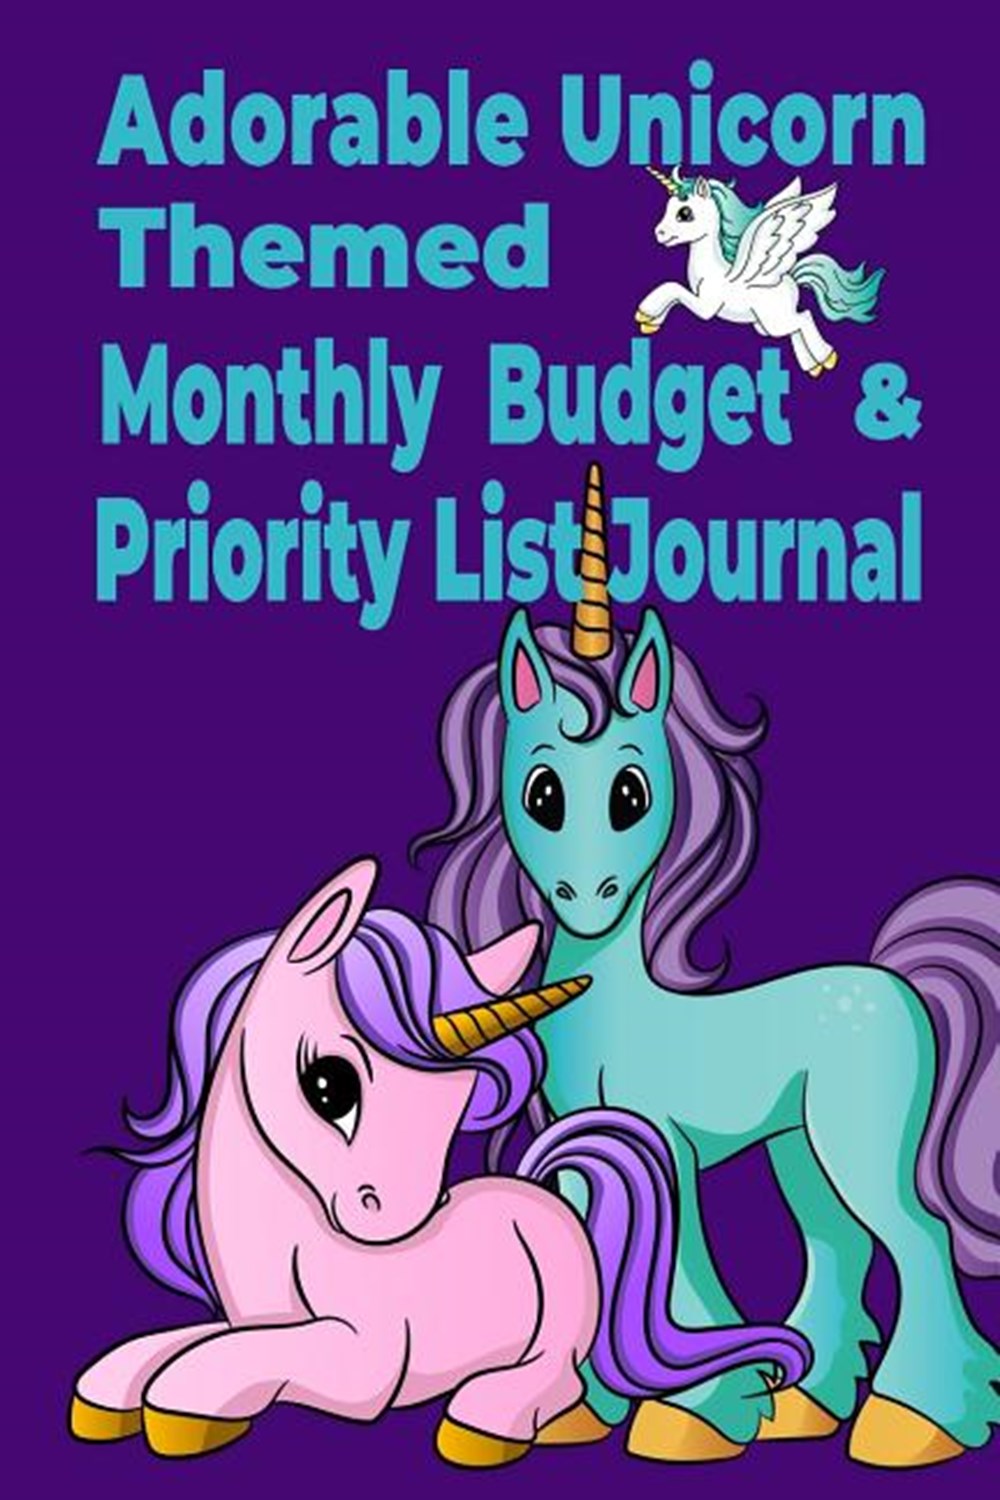 Adorable Unicorn Themed Monthly Budget & Priority List Journal December 2019 - January 2021 Monthly 